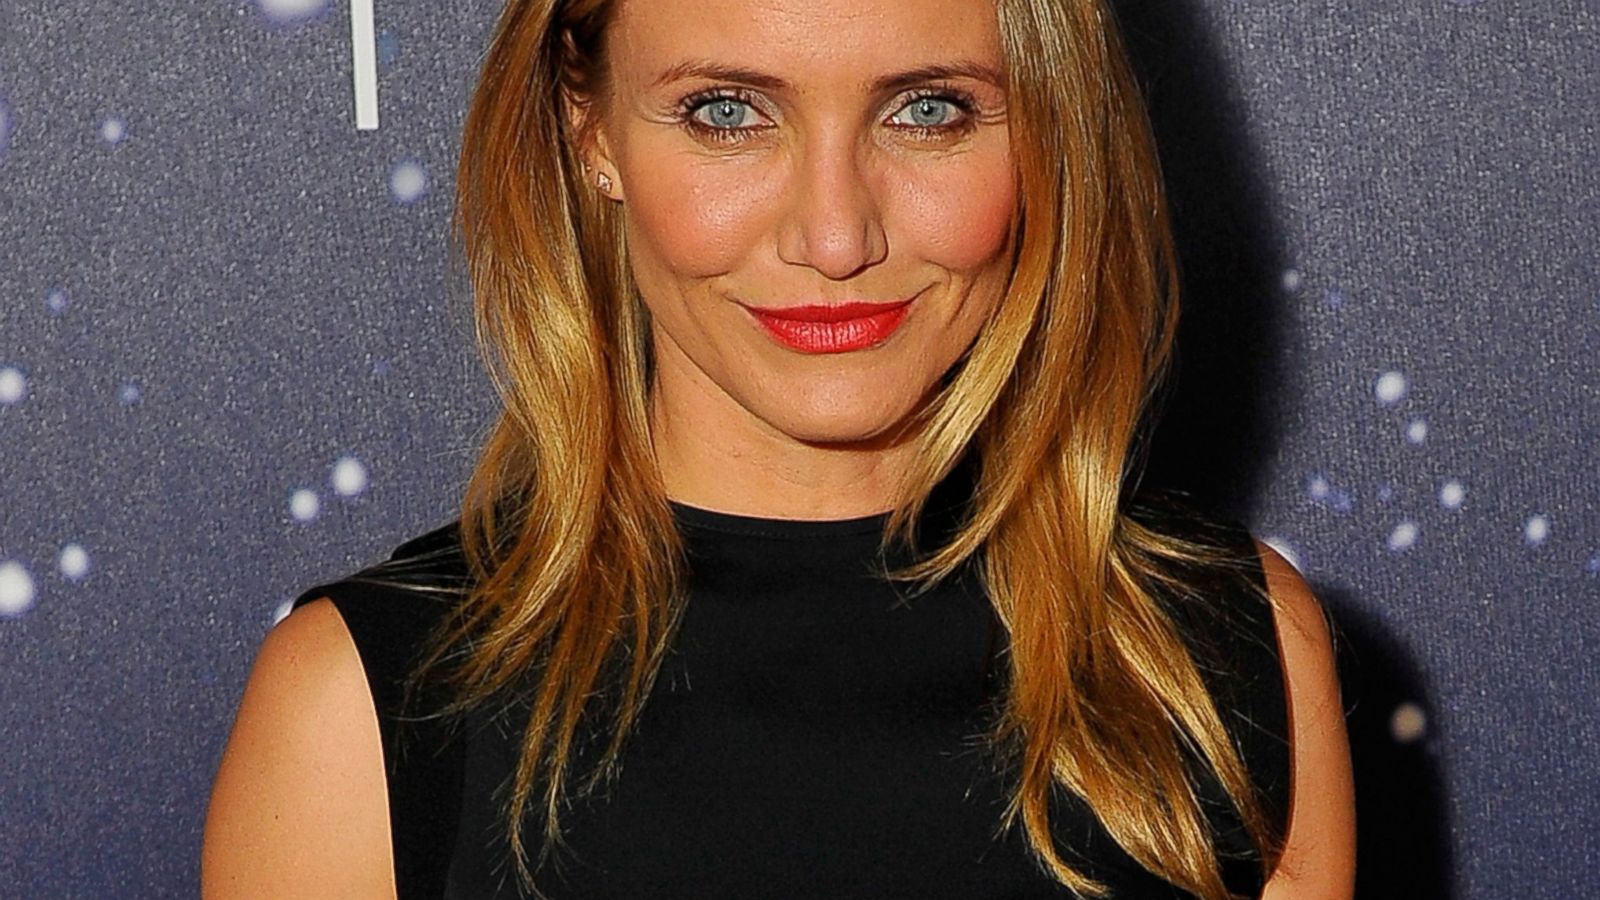 Cameron Diaz's Quotes About Love and Marriage - ABC News